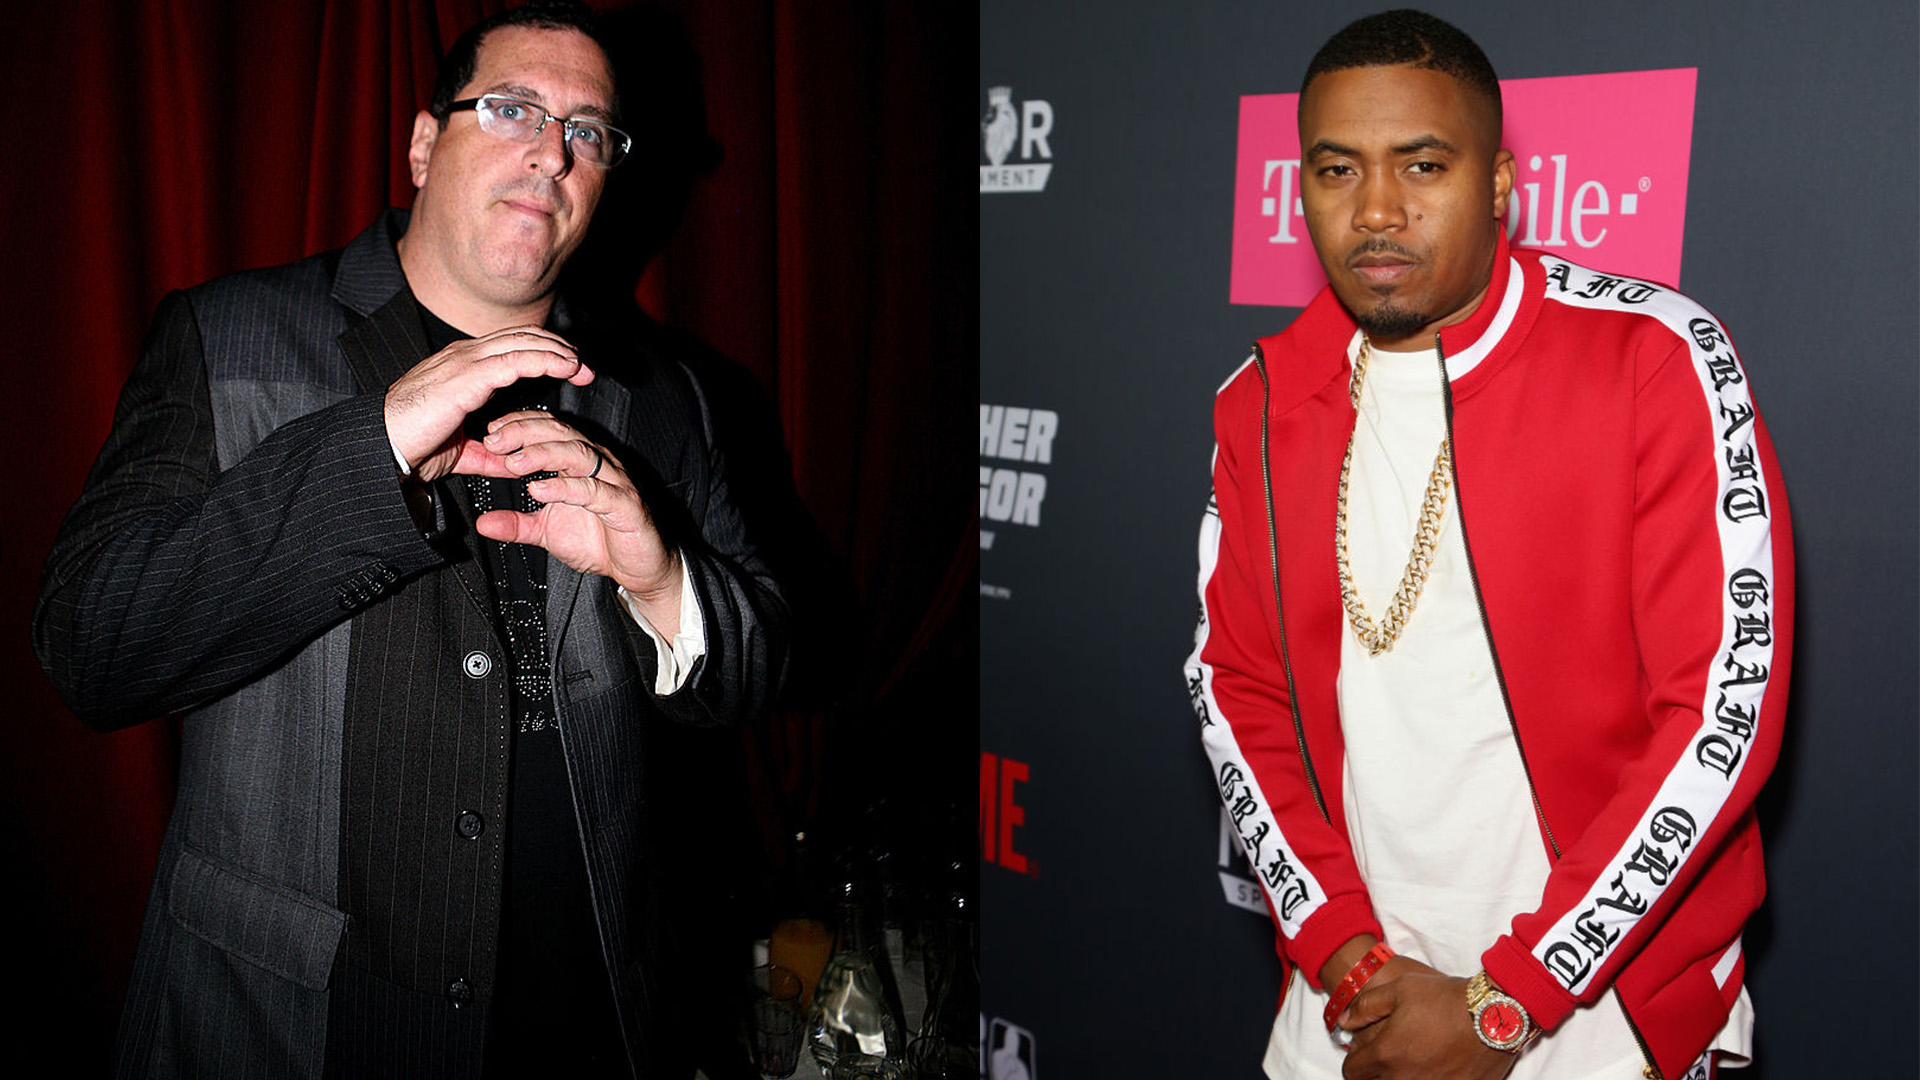 MC Serch Reveals He's Selling His Share Of Nas' Music Catalog, Including The Artist's Debut Album